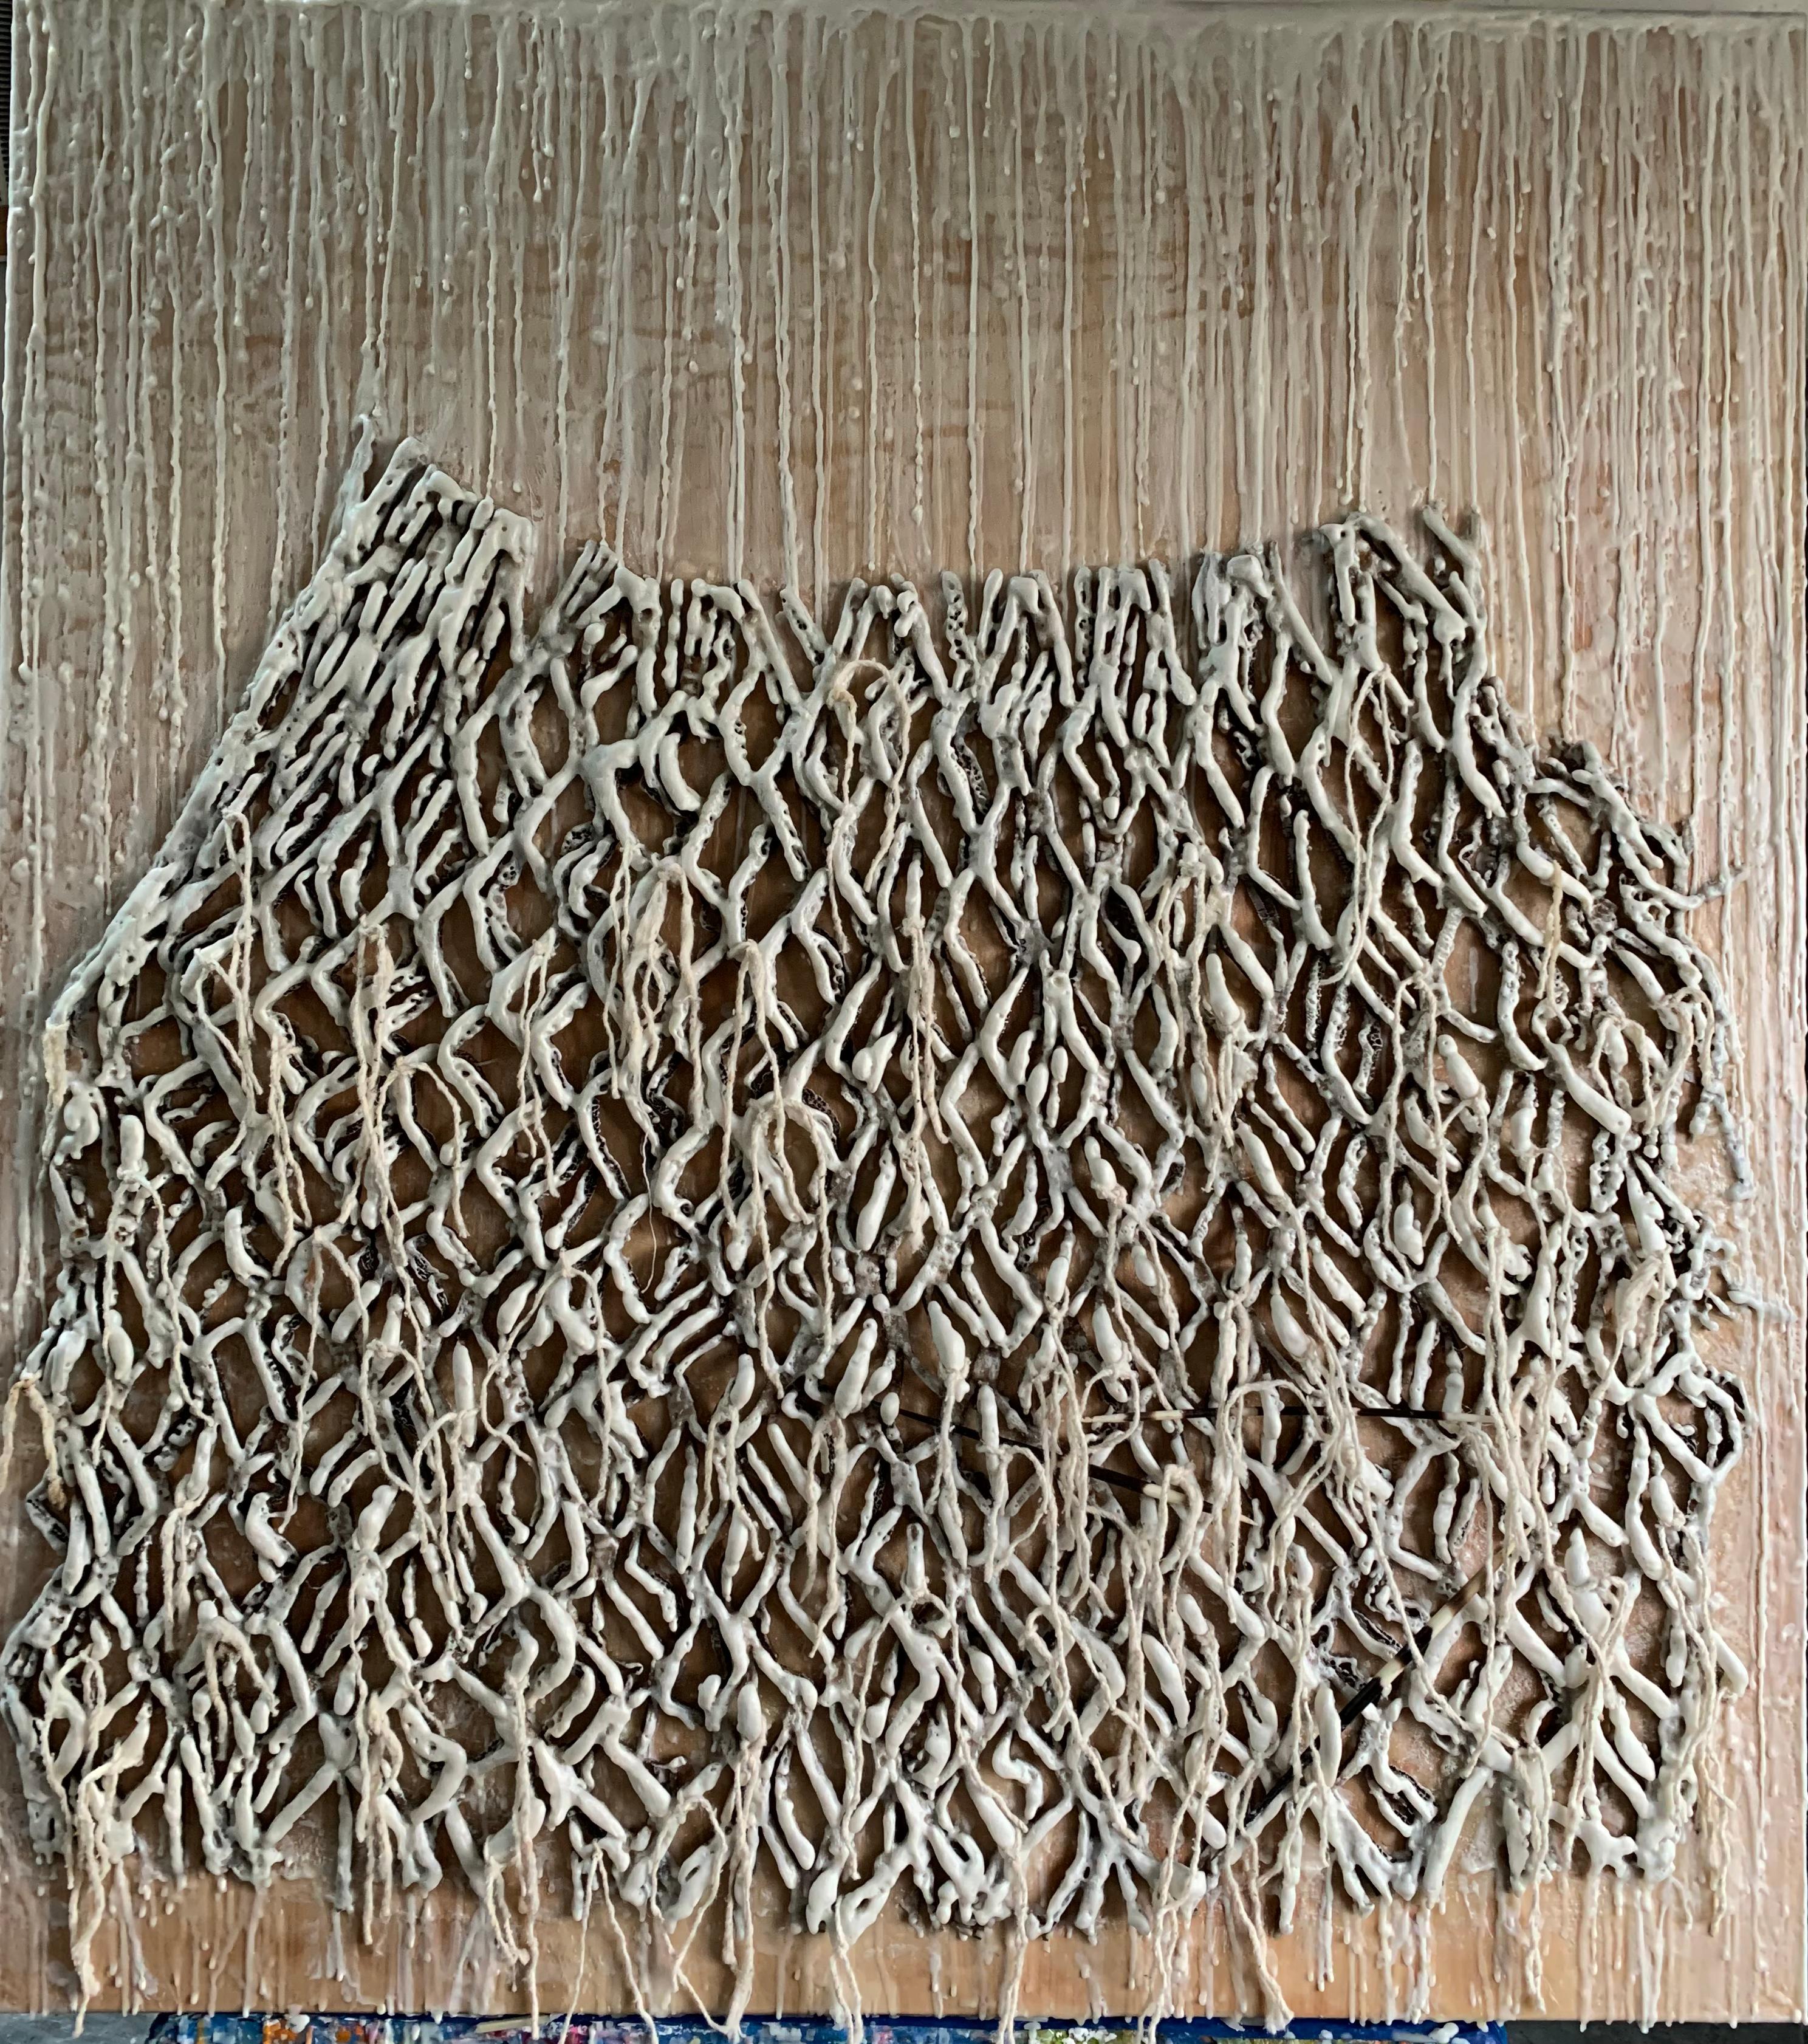 Series: Wax Weave

In Andrea’s Wax Weave, the pure whites and creams, coupled with the darker undertones of the interconnected paper has a calming effect for contemplation. The downward flow of molten beeswax passing through the paper’s